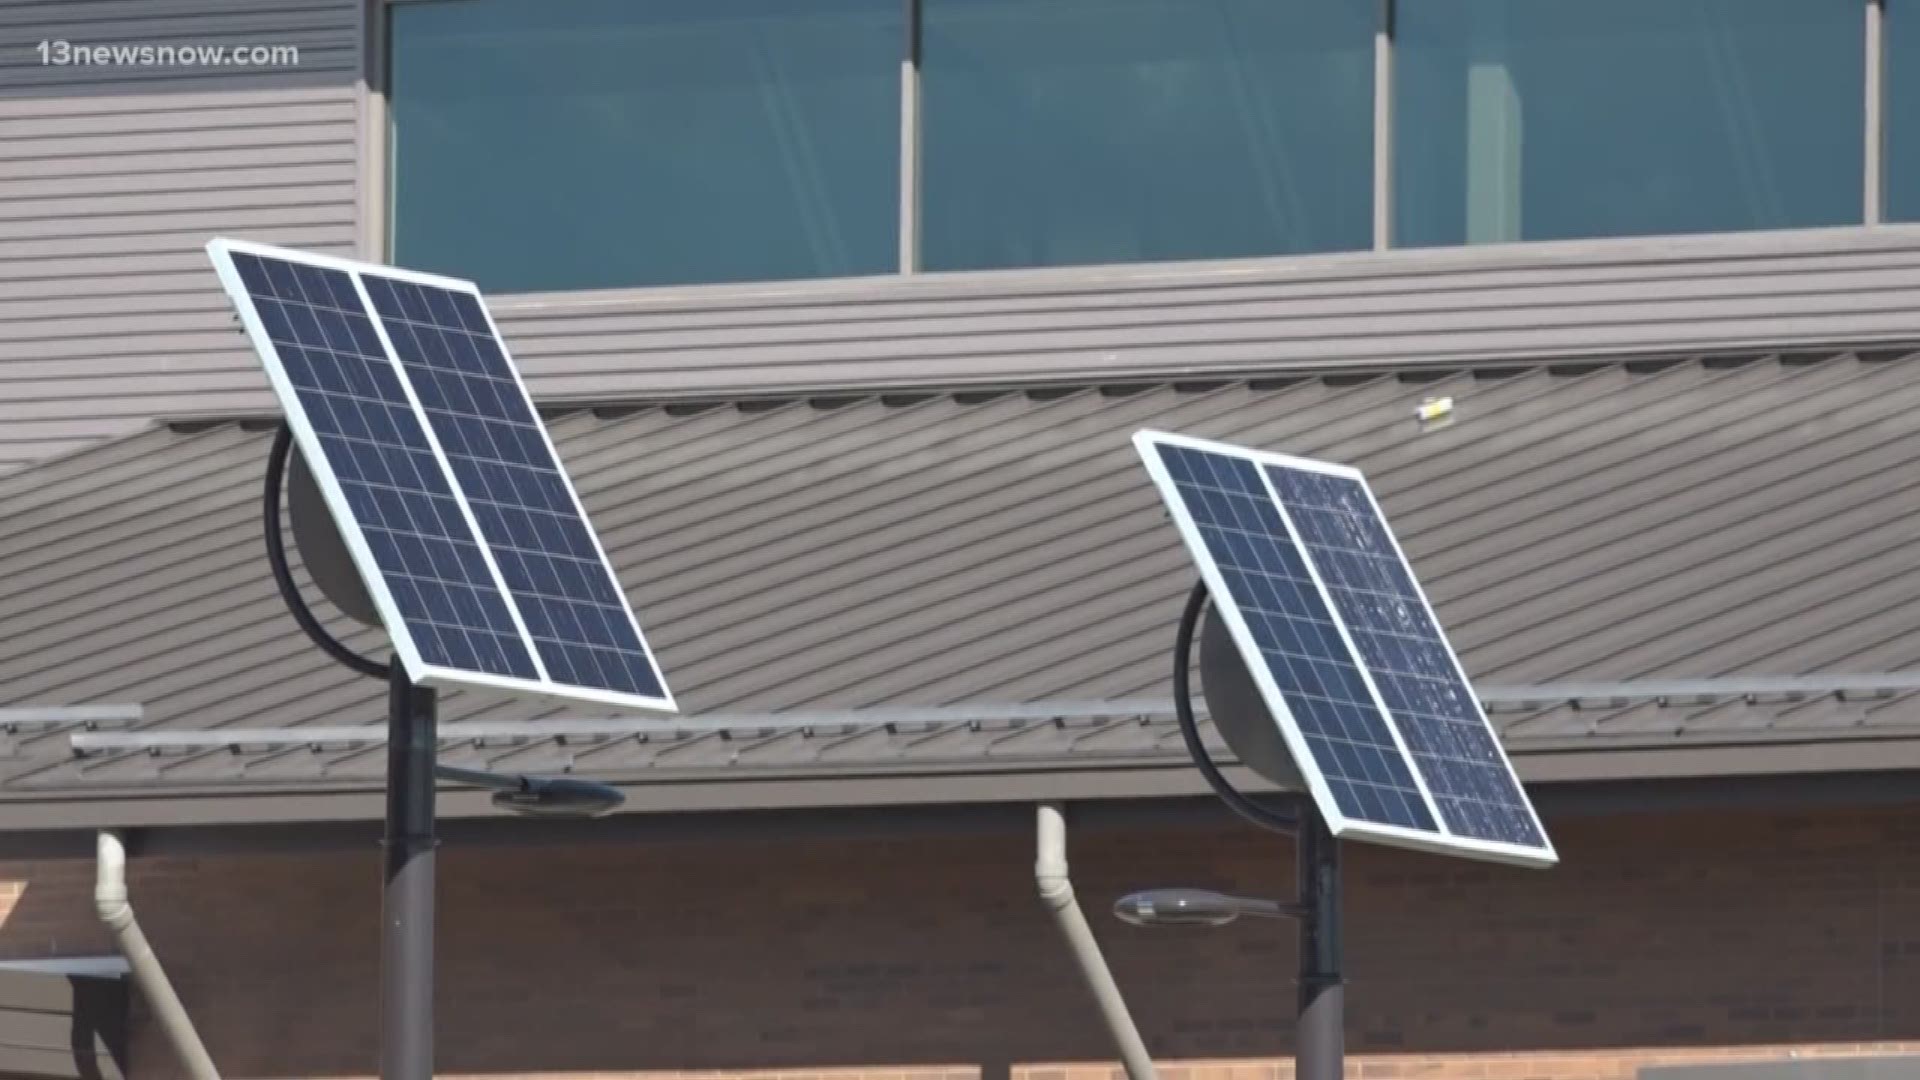 Five Newport News schools are getting a little greener. Newport News Public Schools partnered with Sun Tribe Solar to install solar panels ar some of the schools.